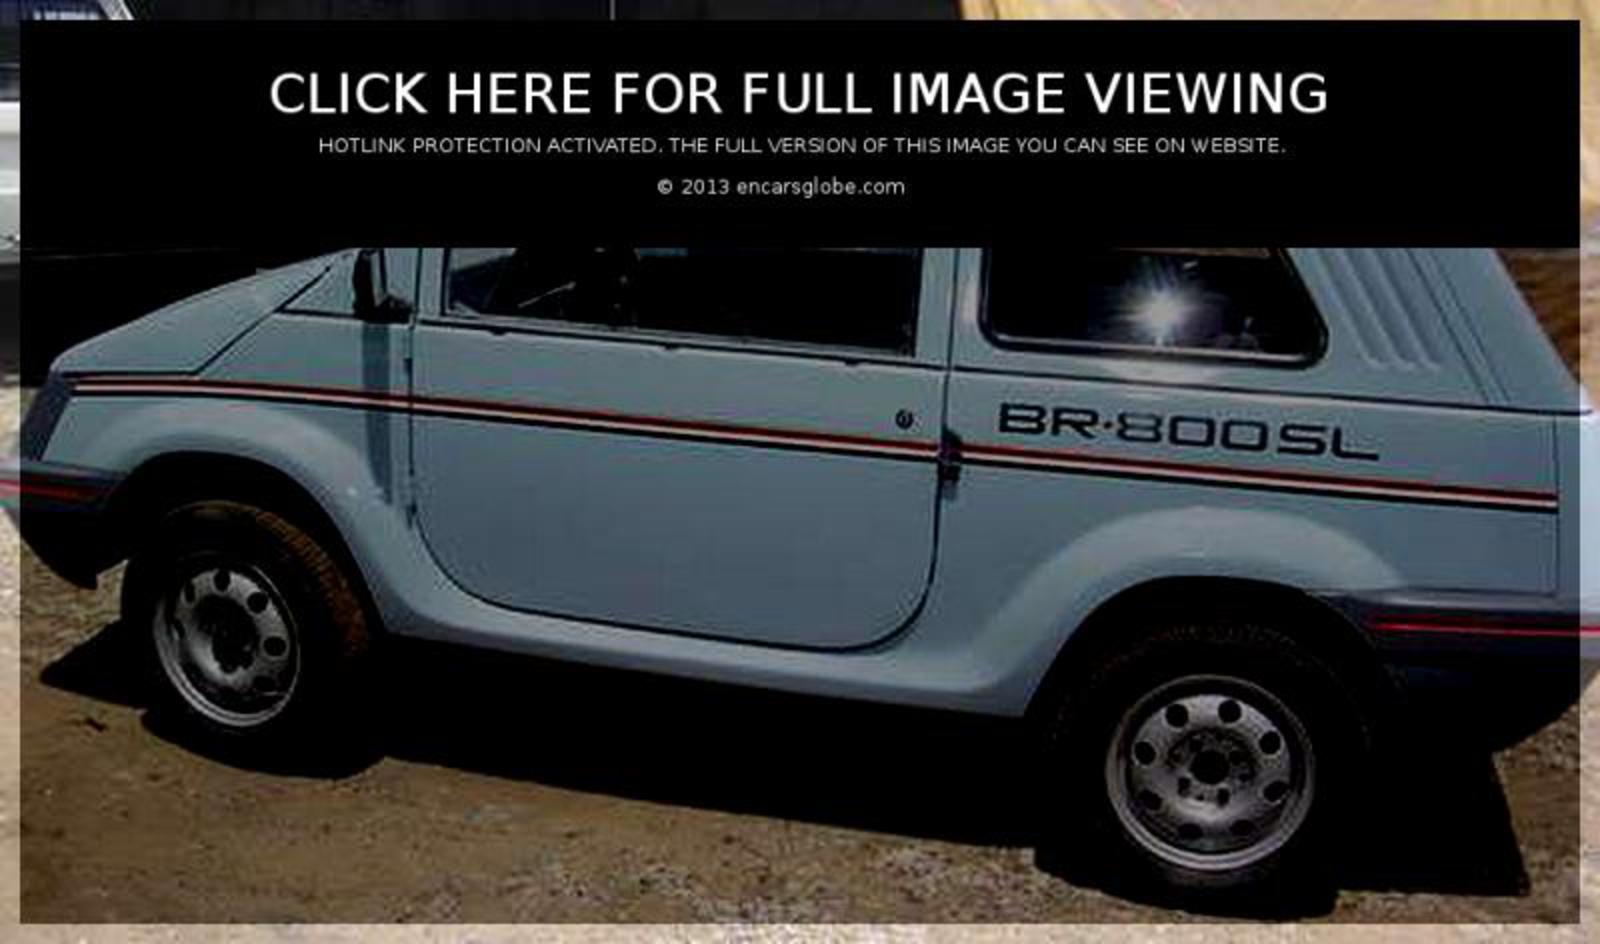 Gurgel BR-800: Photo gallery, complete information about model ...